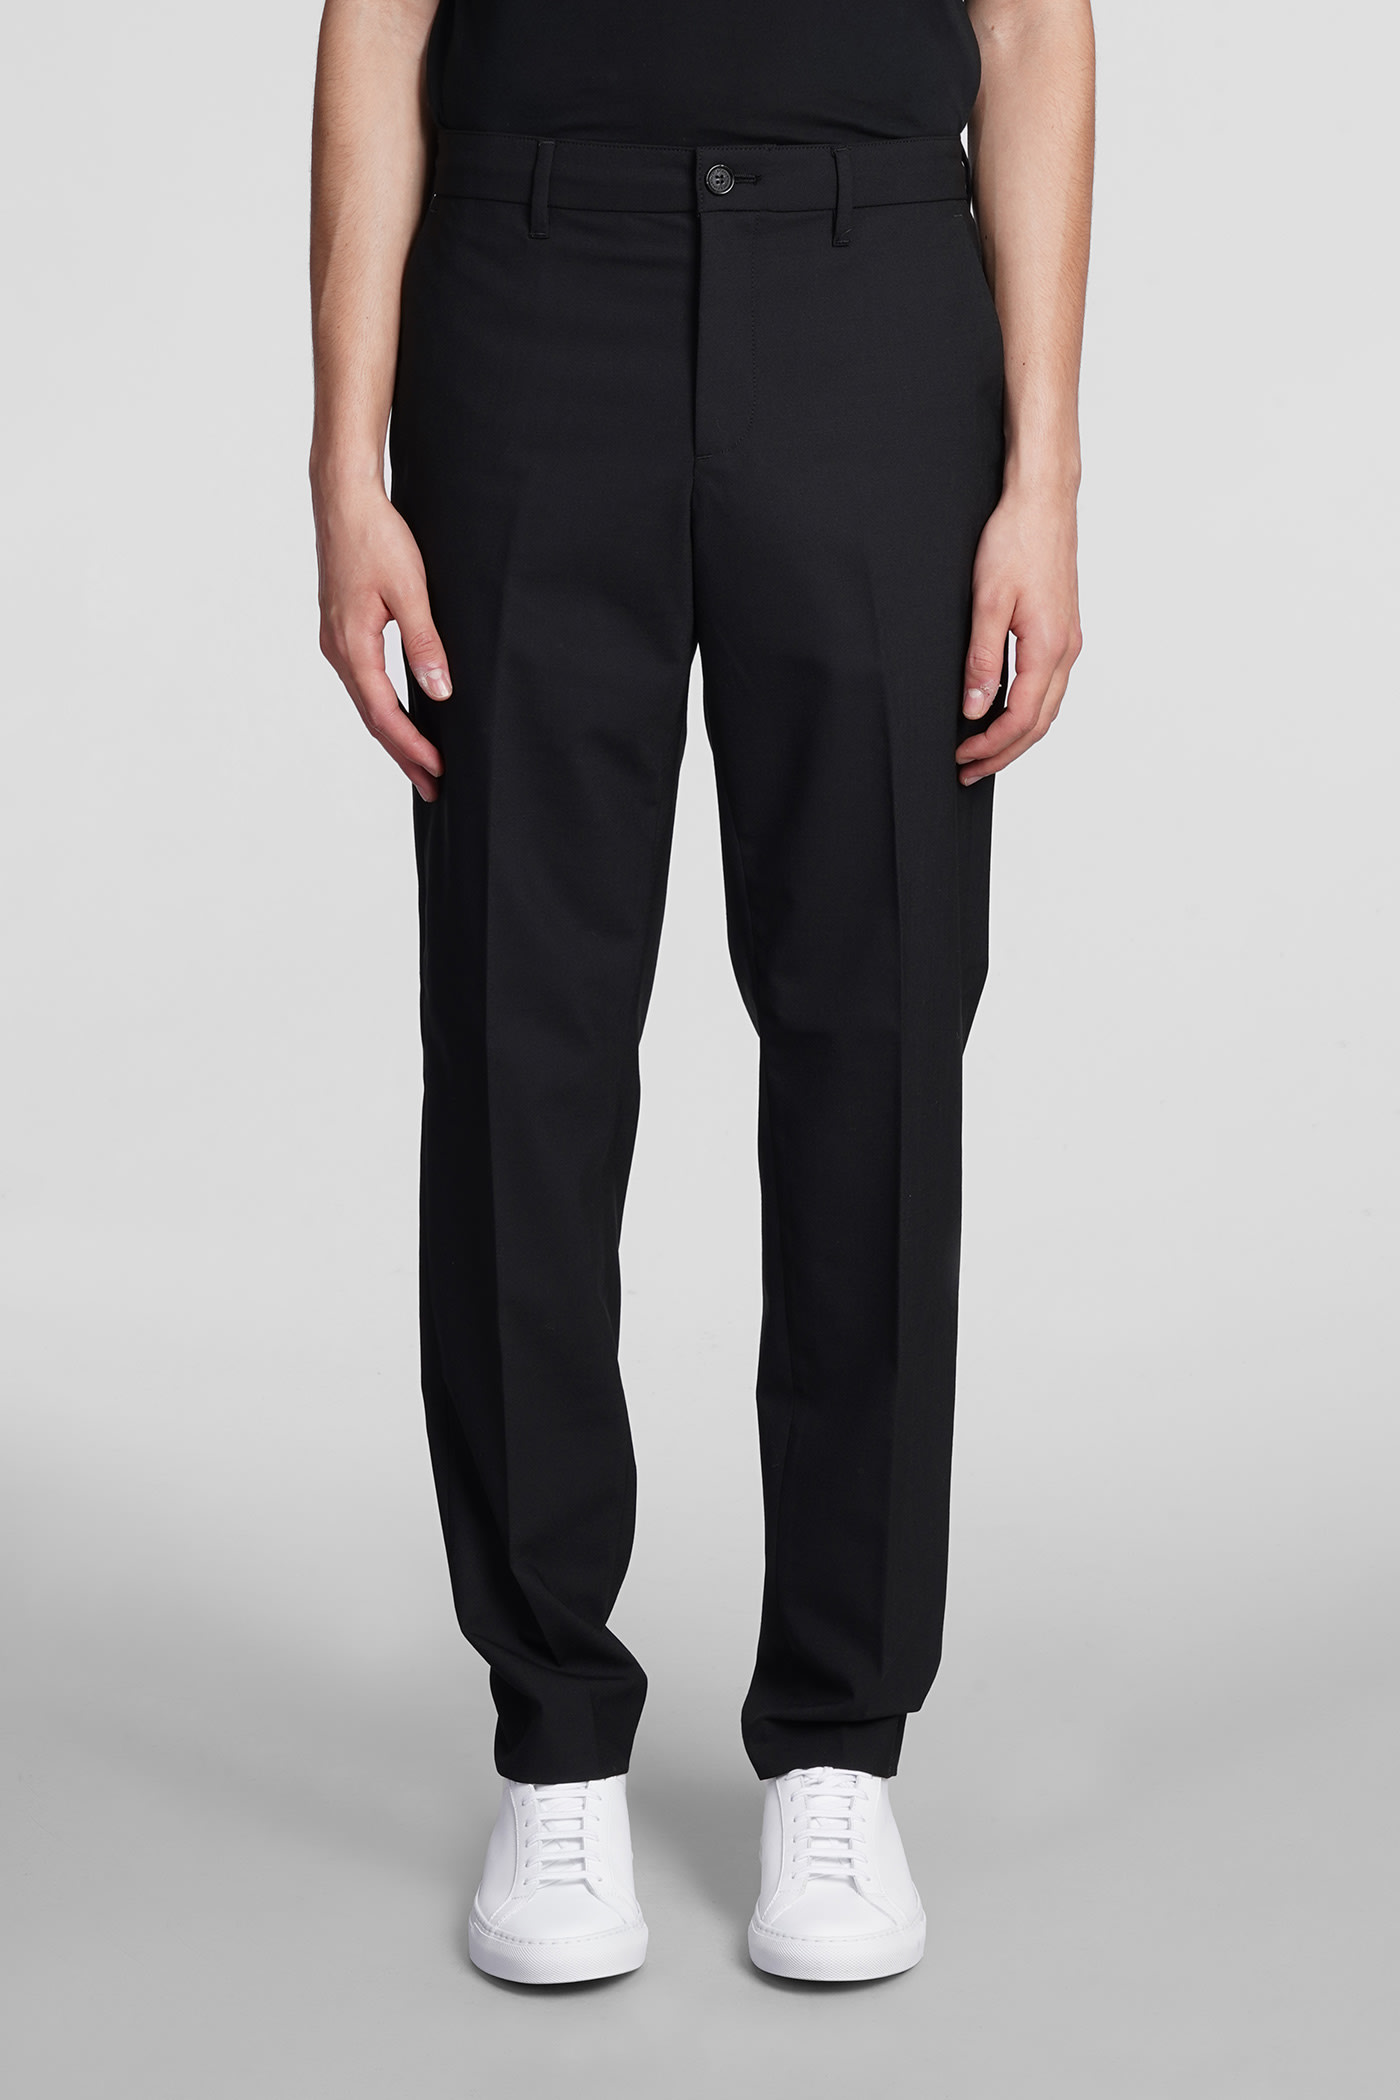 Department Five Pants In Black Polyester